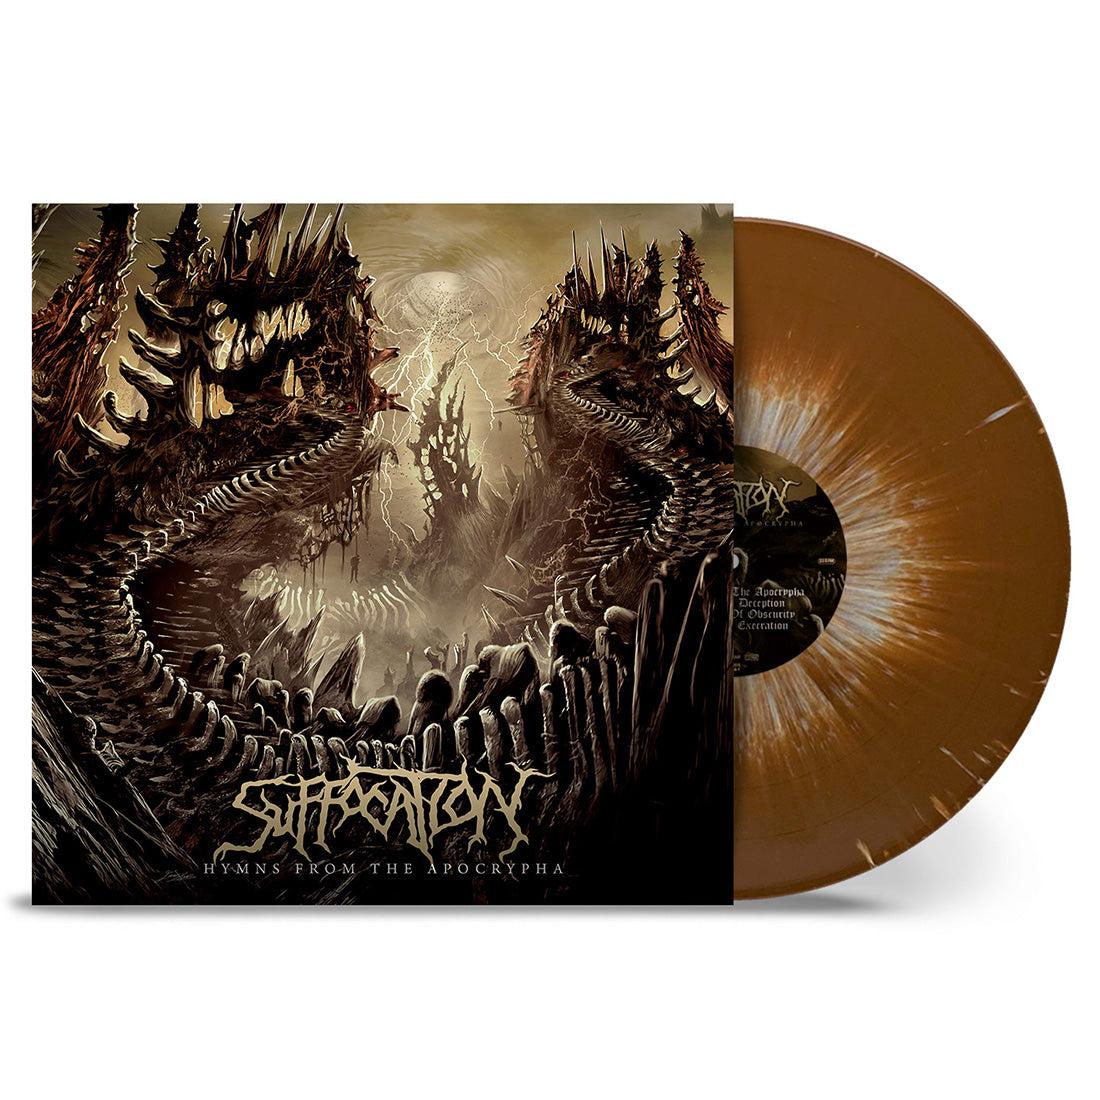 Suffocation - Hymns From The Apocrypha: Limited Brown White Splatter Vinyl LP